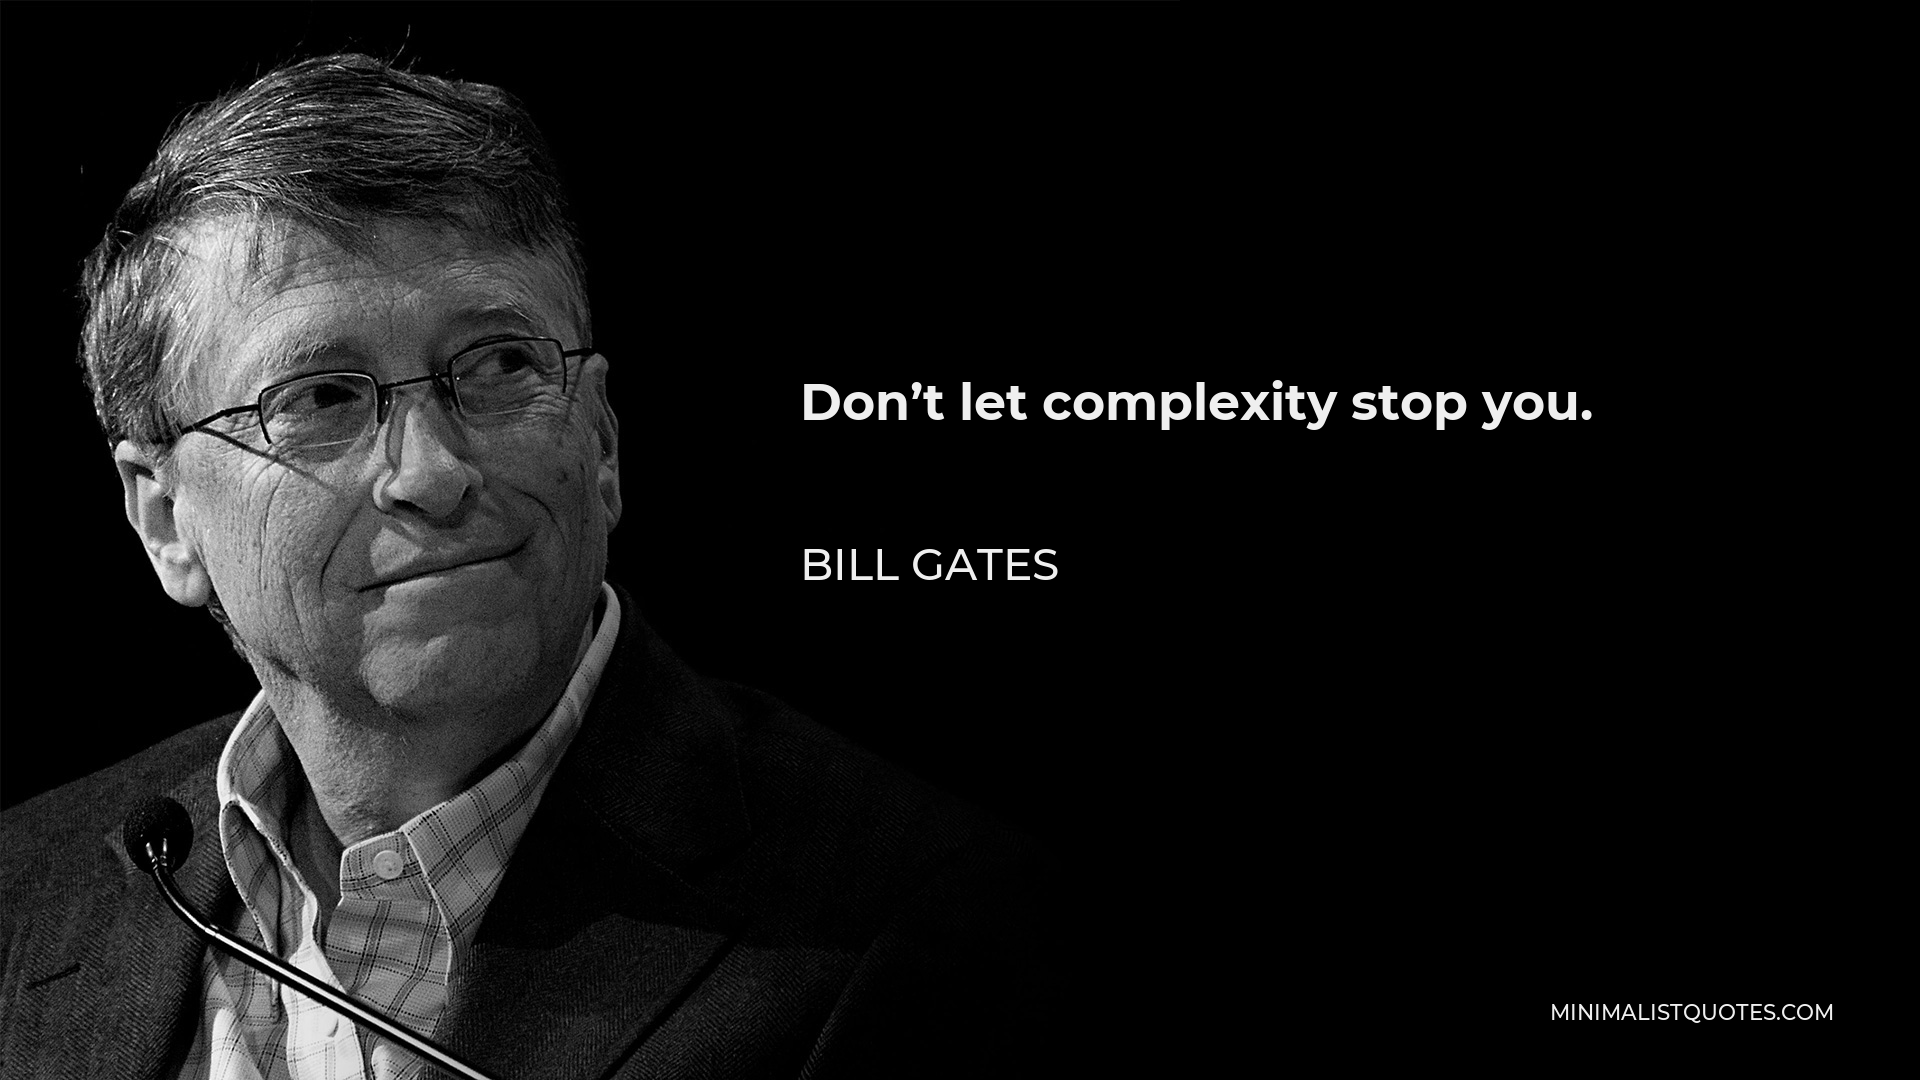 Bill Gates Quote - Don’t let complexity stop you.